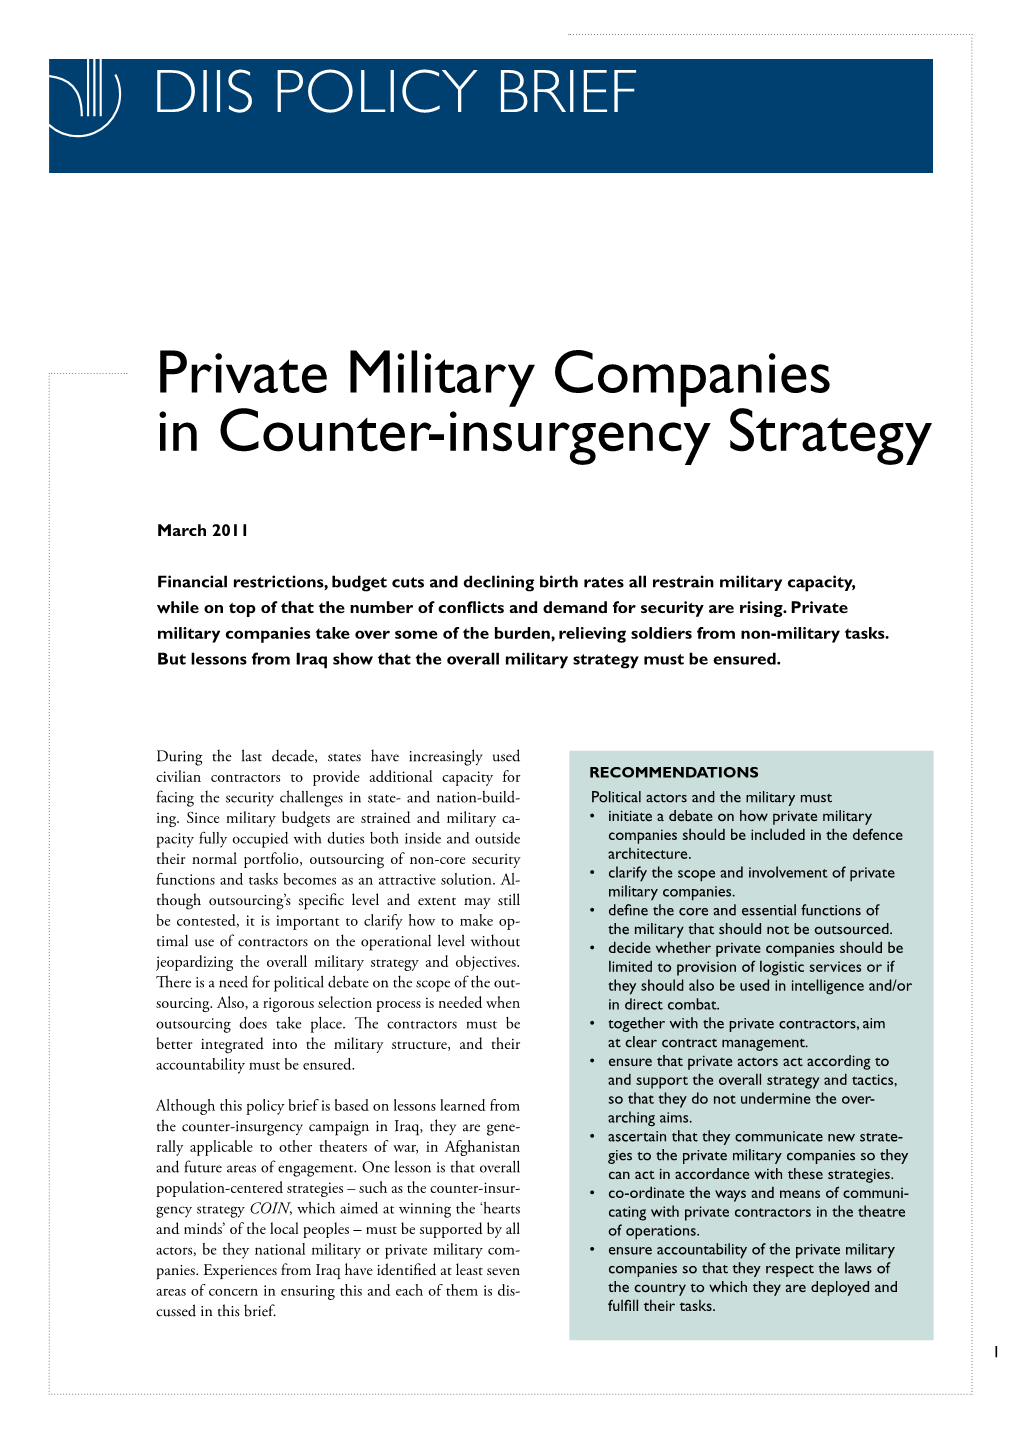 Private Military Companies in Counter-Insurgency Strategy